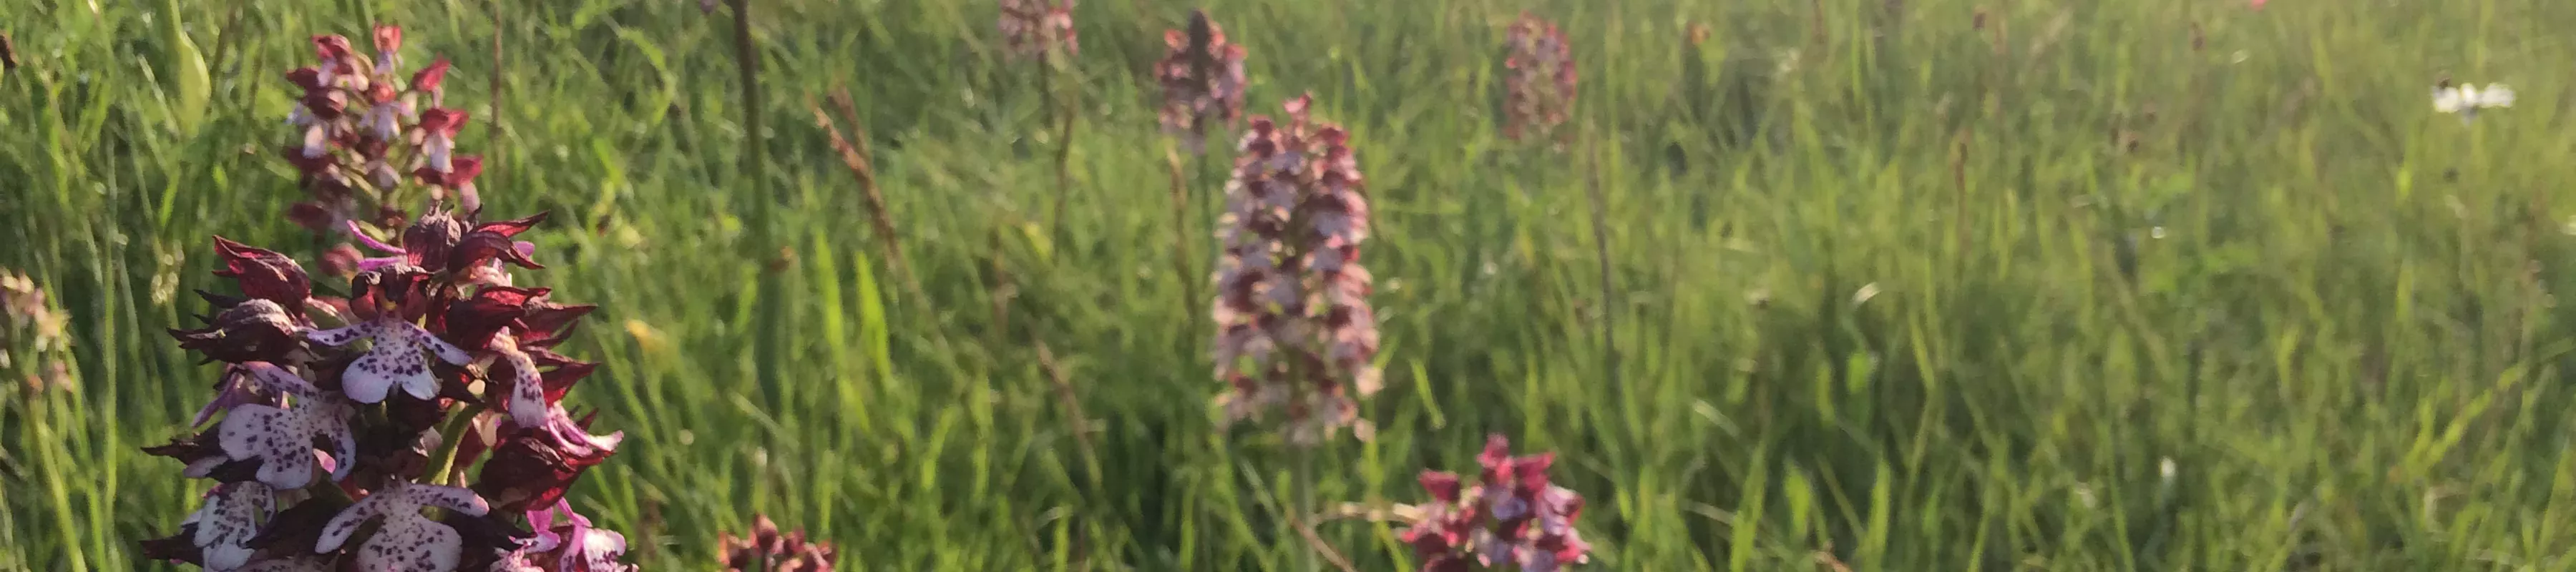 Field with purple orchids in